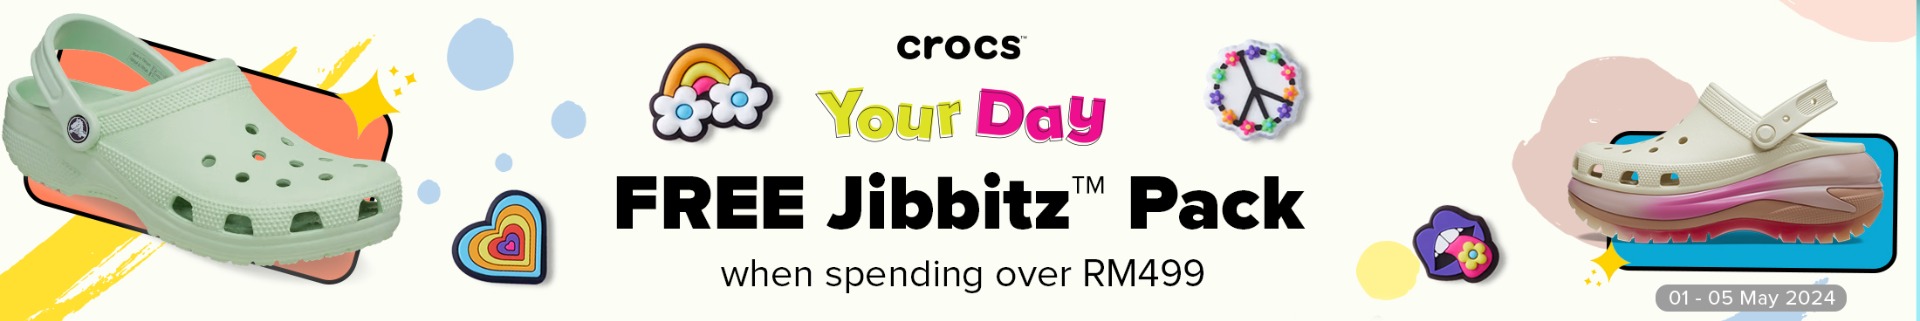 Croc Your Day